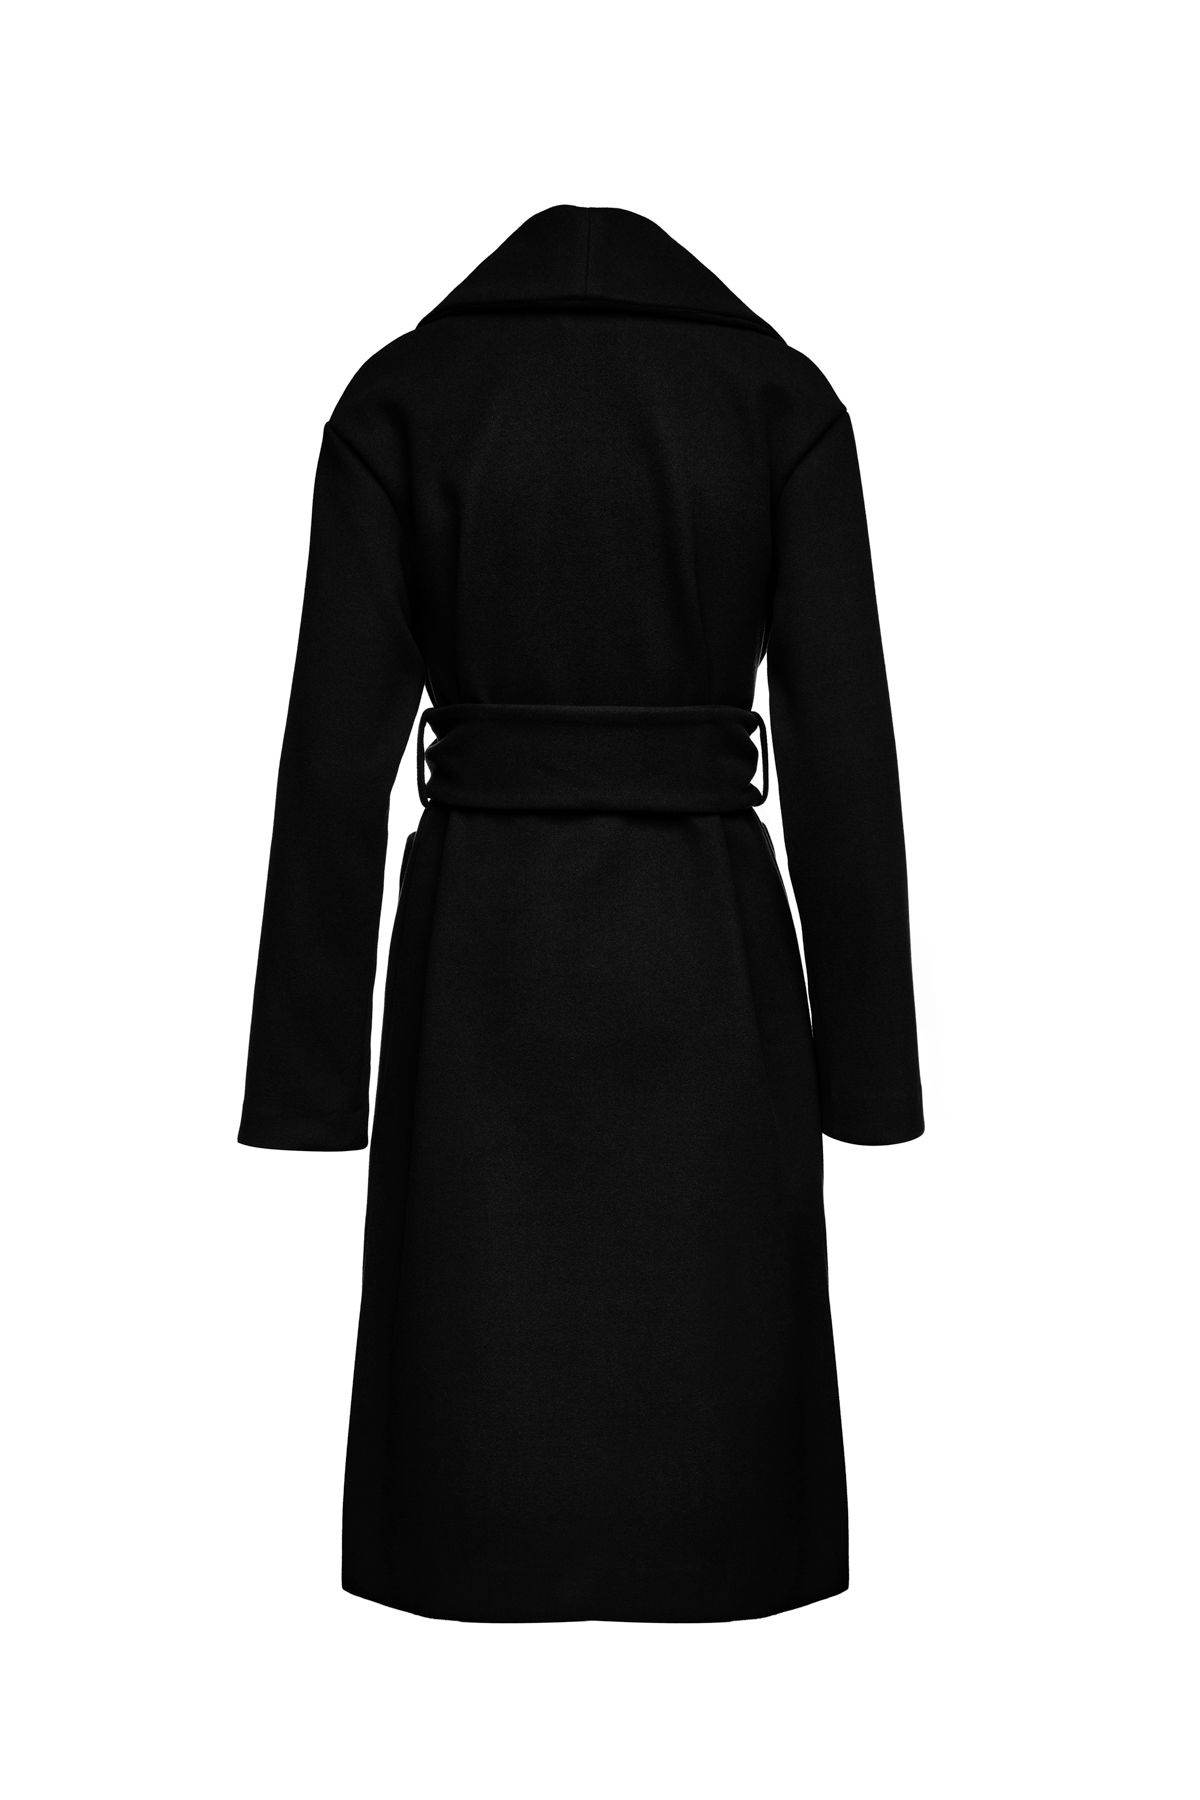 This long black coat is crafted in mouflon style fabric. There are large square patch pockets on either side. It has a large lapel and drop shoulders. The coat fastens in the front with 2 large black plastic buttons. At the waist it has belt loops on the left and right so that it can be worn with the 9cm wide belt which is in the same fabric. The coat has big slits on either side. It is styled in a straight silhouette. This piece is ideal for wear in the day or for an evening out.